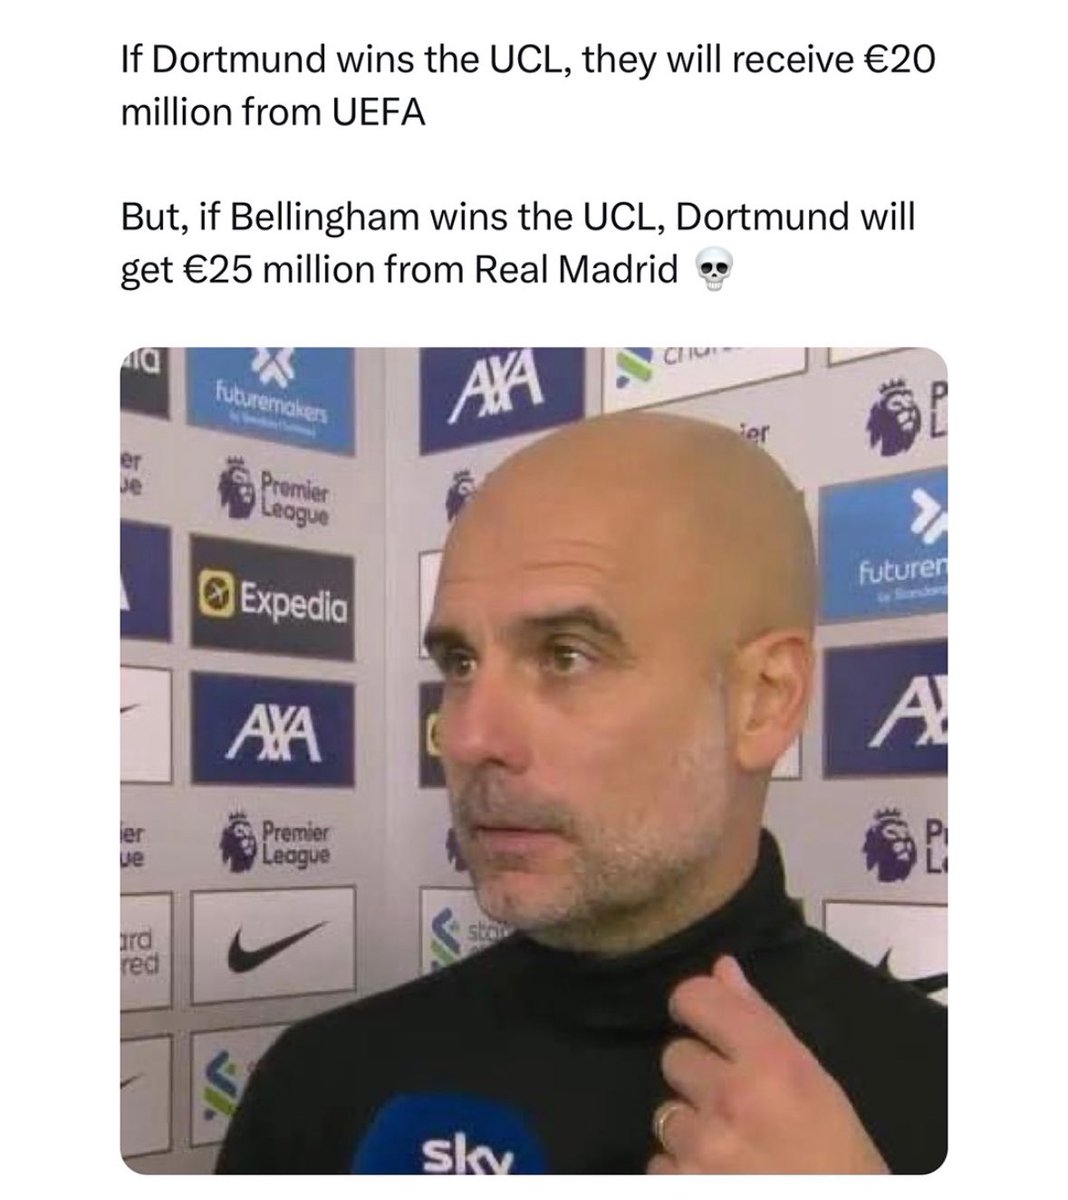 You are the CEO of Dortmund, what do you tell the team to do in this situation?